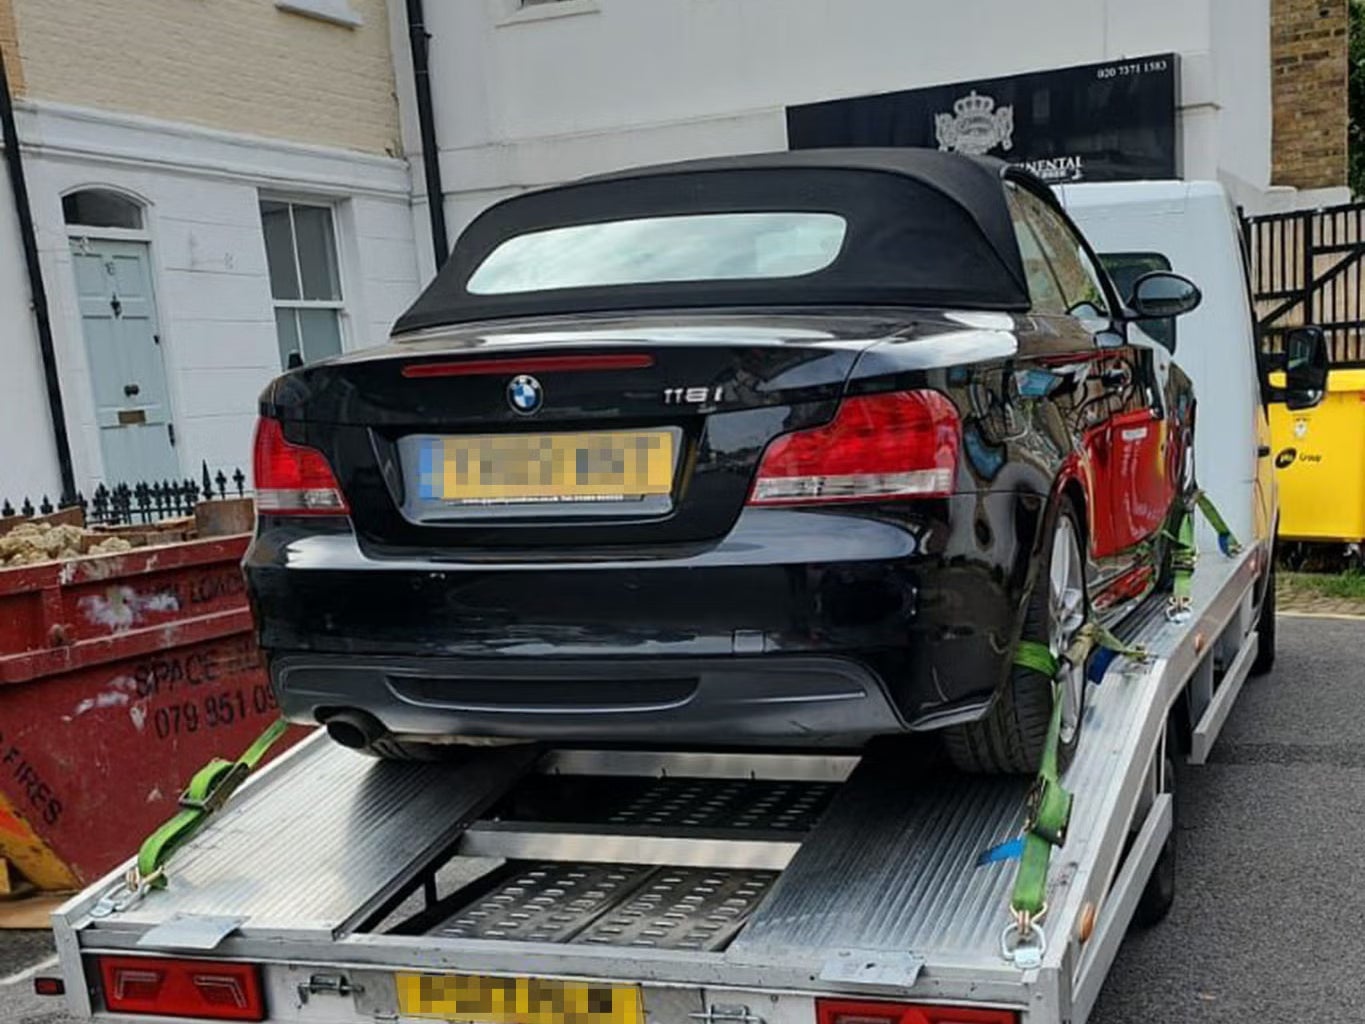 David Tarsh’s BMW being towed away for repair - he says he was offered £2,000 less than the market price by Aviva to fix his BMW